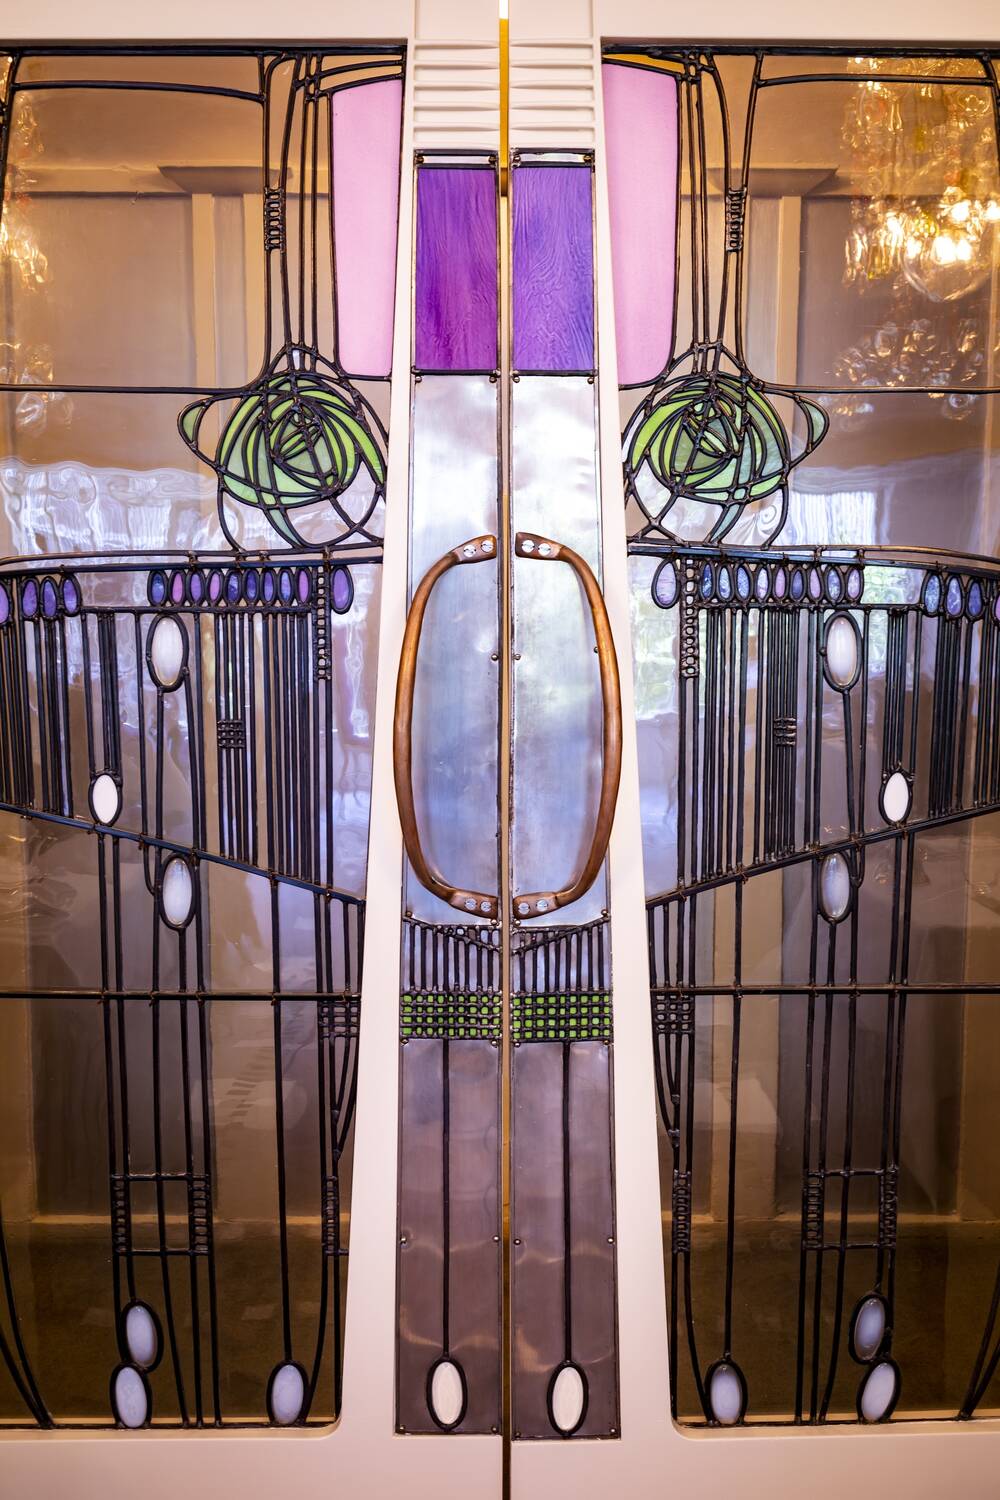 A detail of elaborate Mackintosh-designed entrance doors to a tea room. They are made of polished metal panels with green stylised roses on each side.